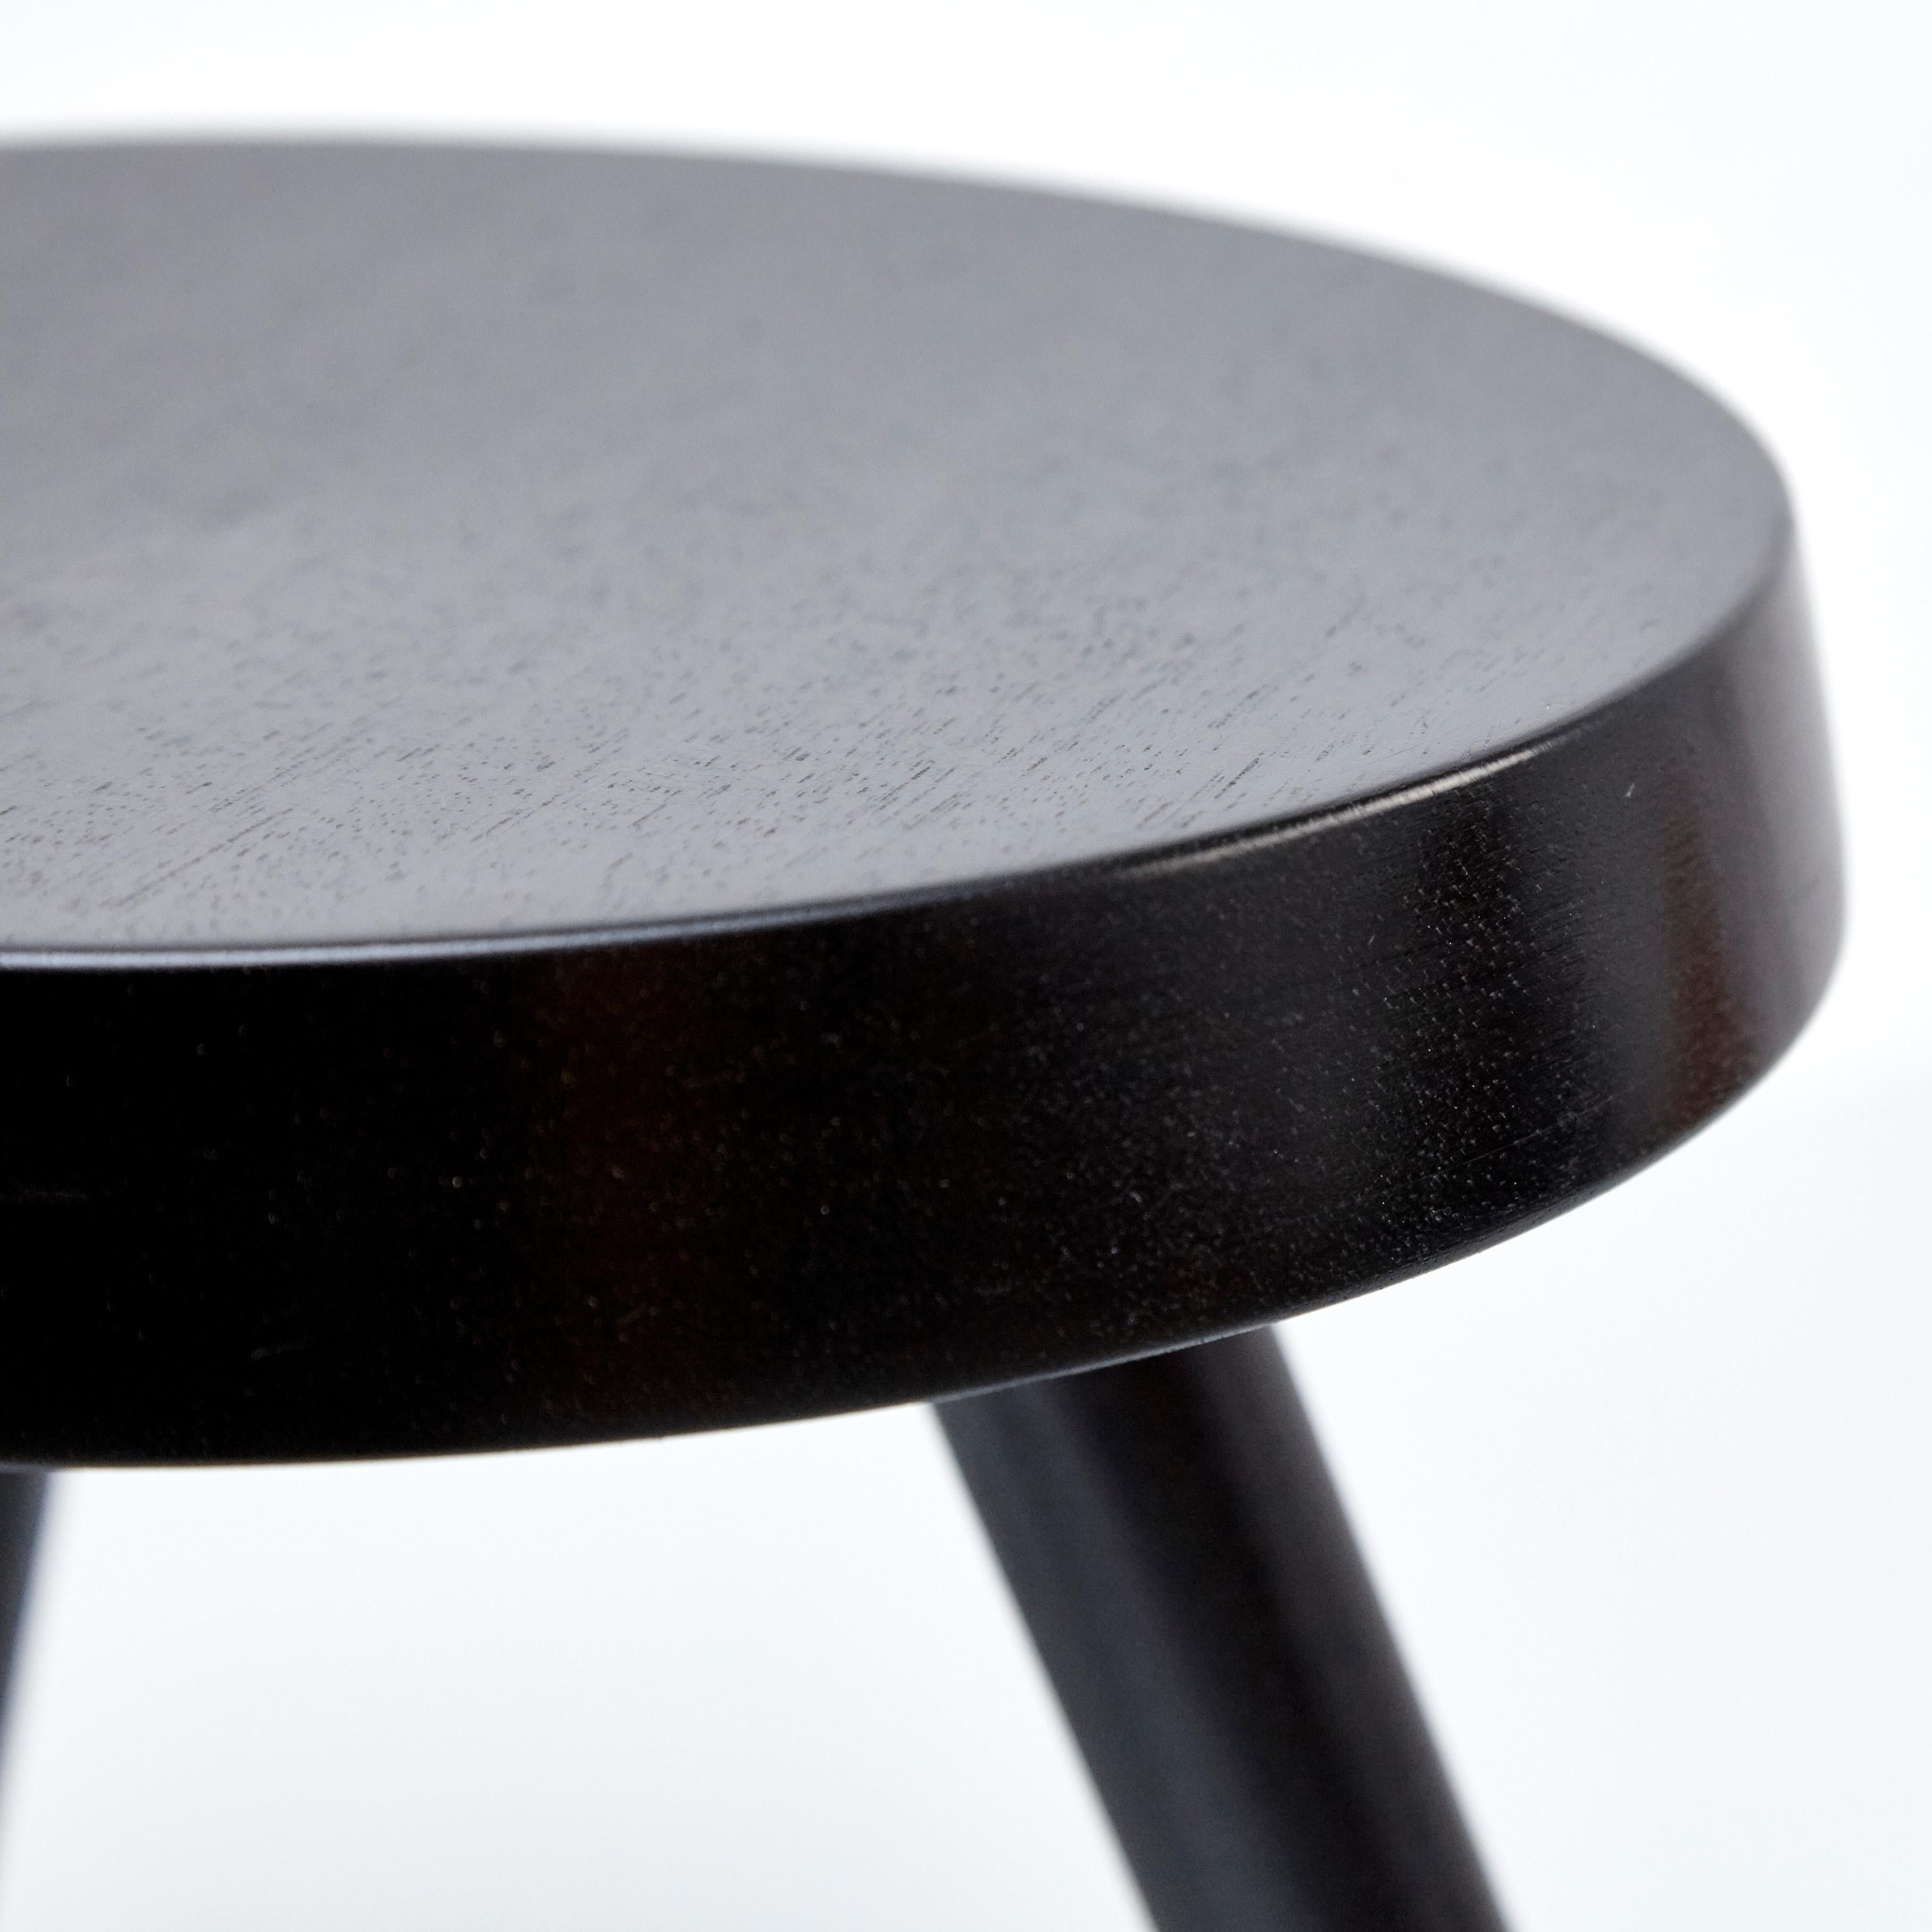 Late 20th Century After Charlotte Perriand, Mid Century Modern Black Wood Stool - Free Shipping